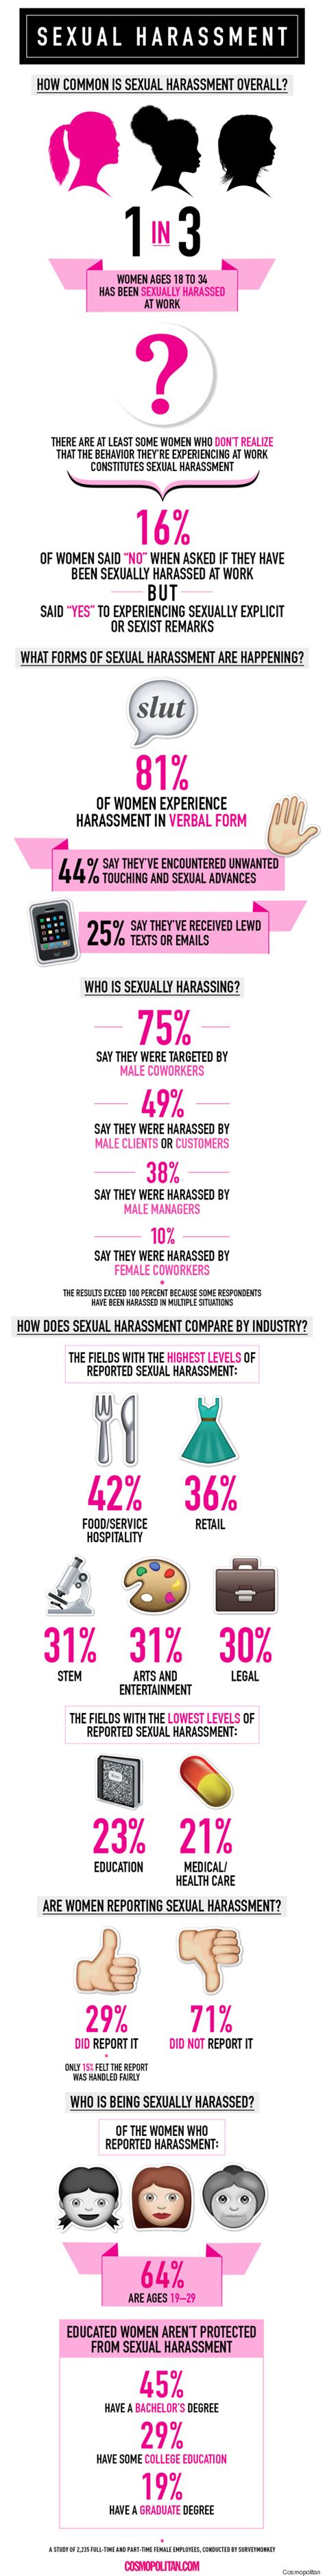 1 in 3 women has been sexually harassed at work according to survey huffpost